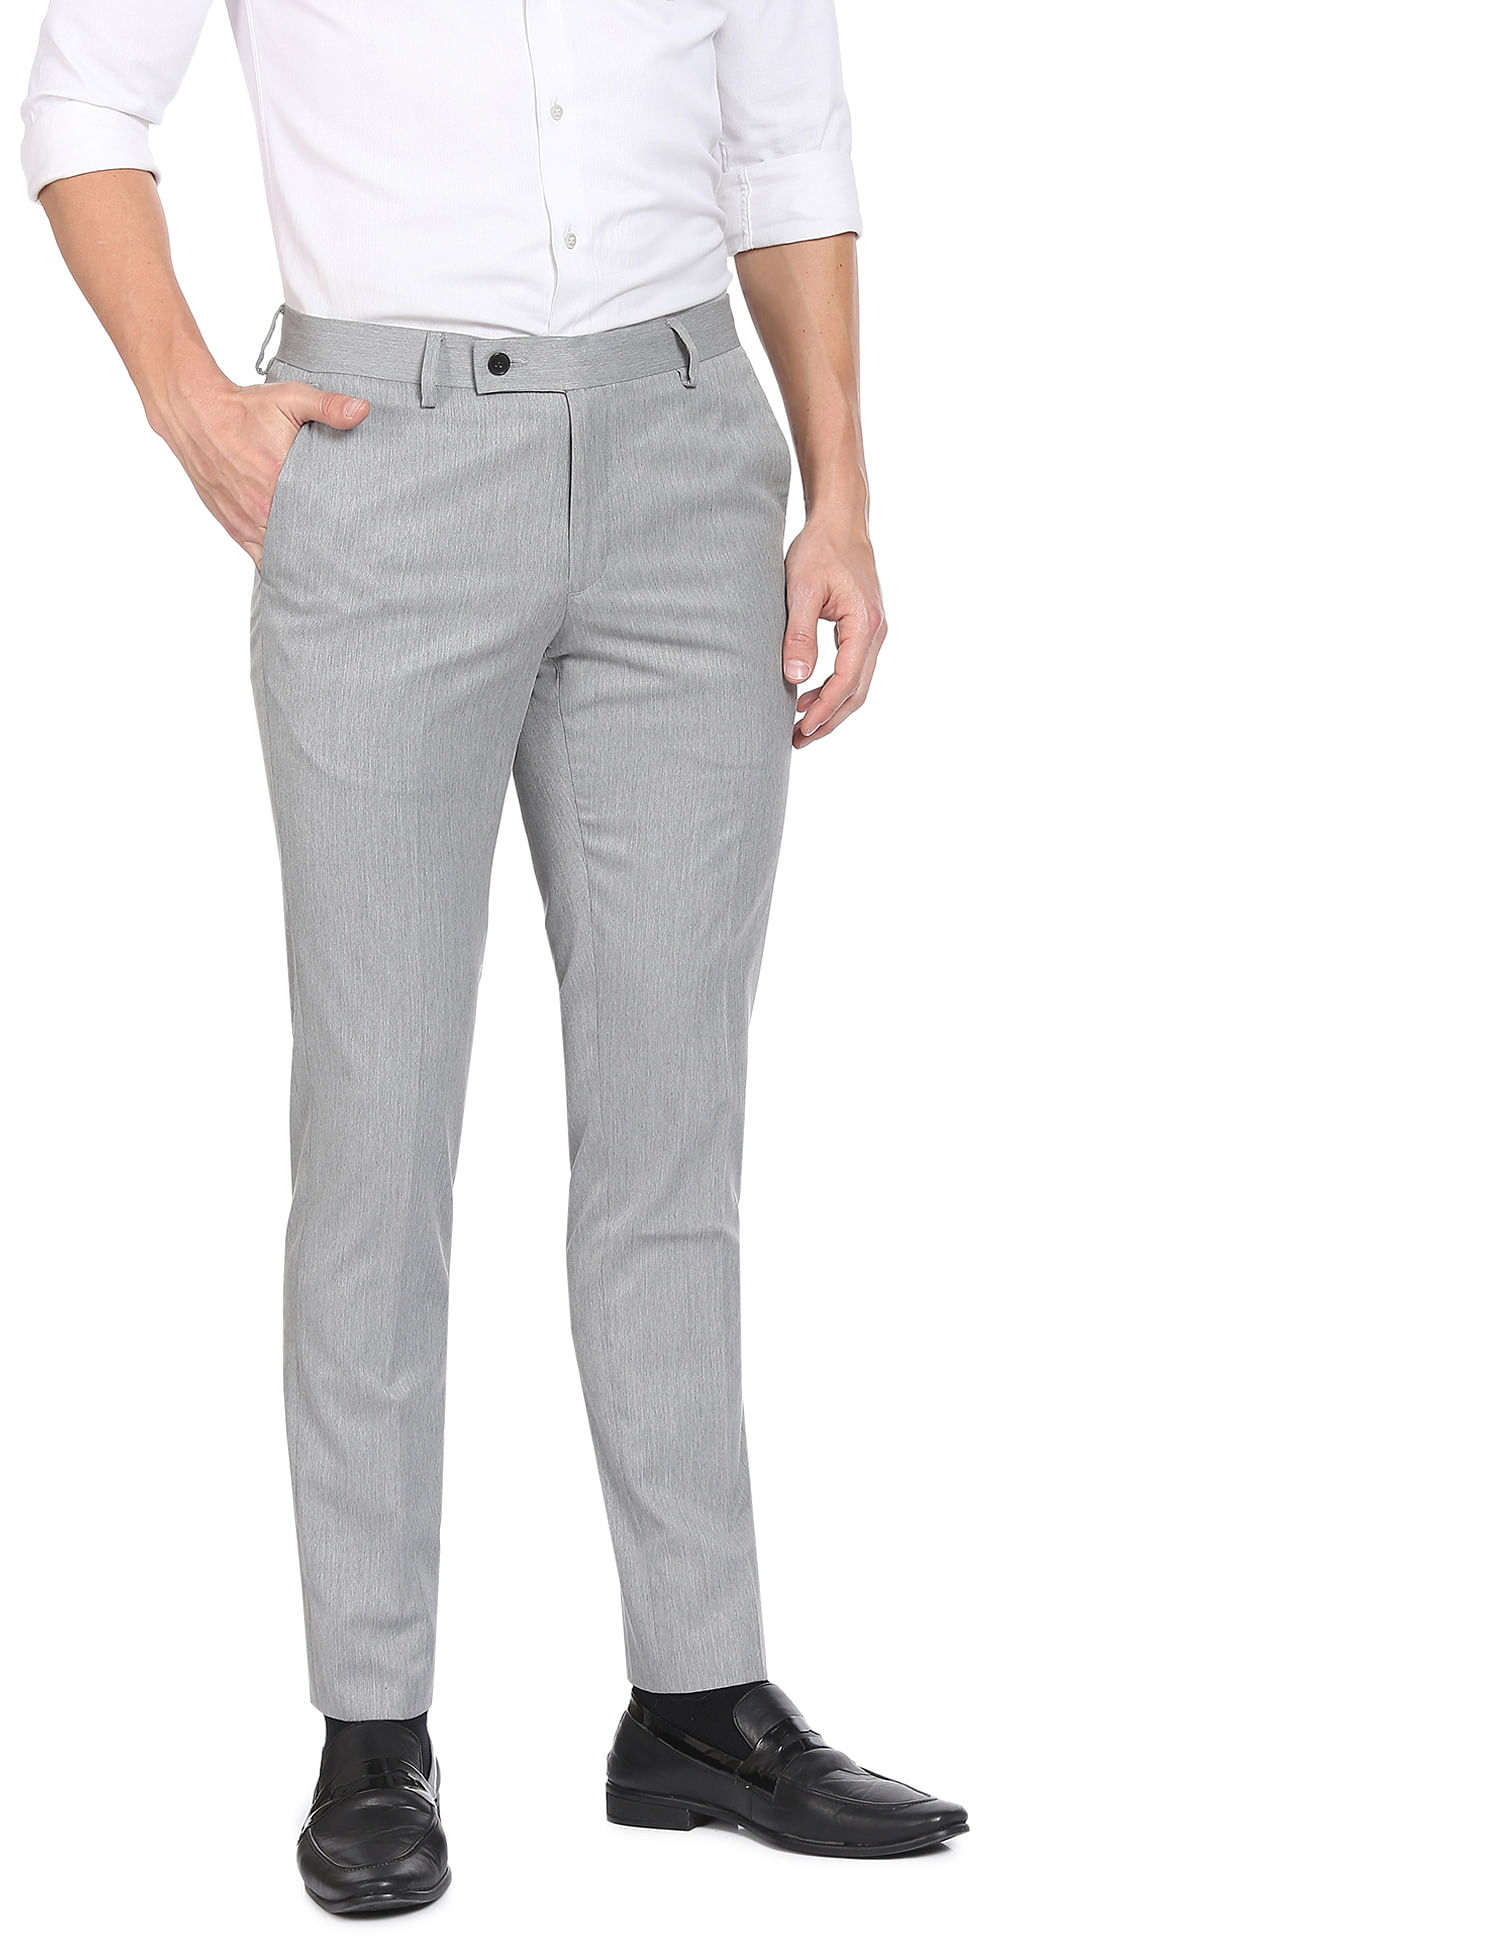 Buy Grey Trousers & Pants for Men by Haul Chic Online | Ajio.com